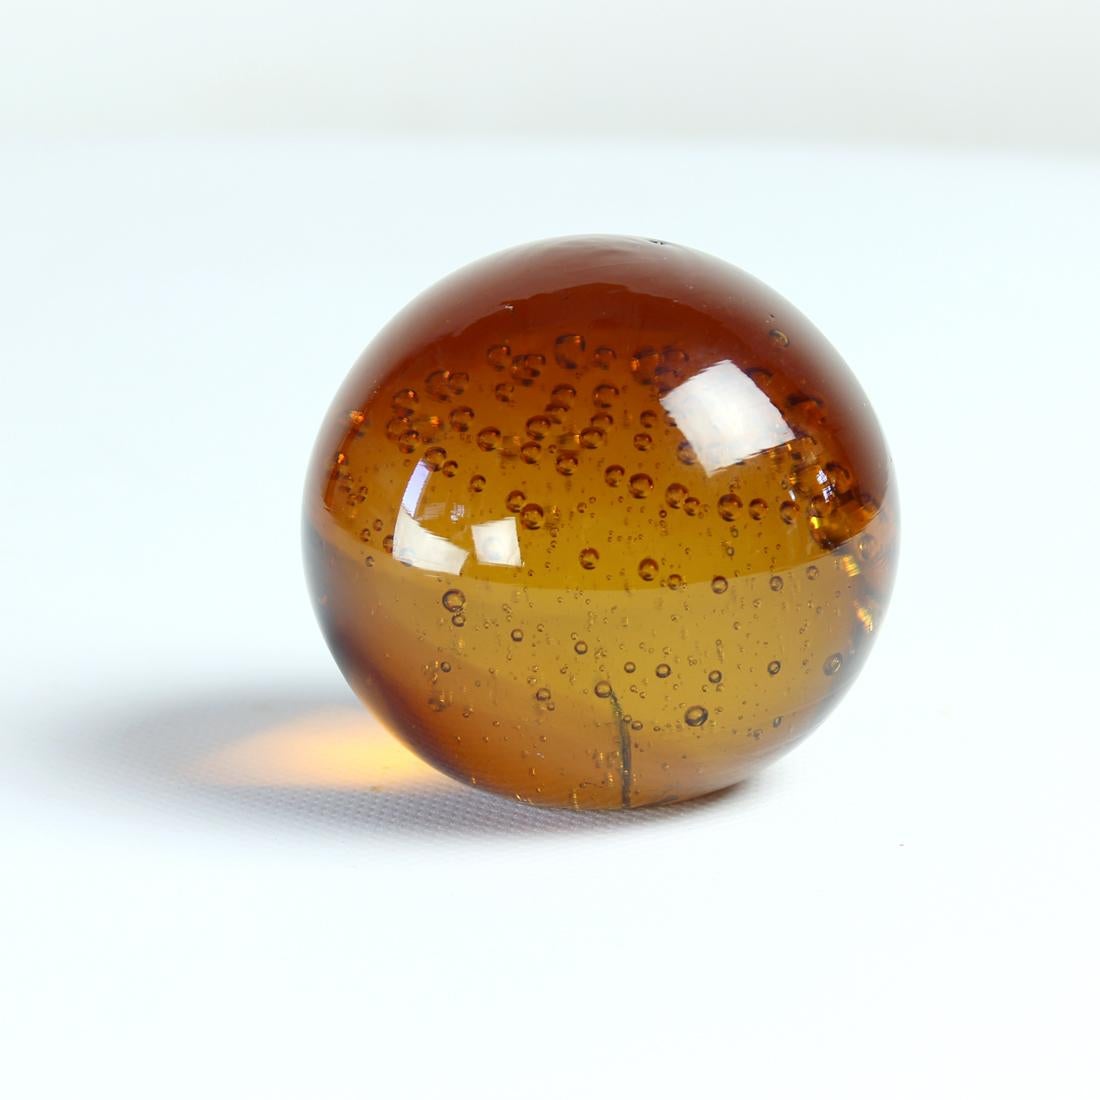 Unique vintage desk paperweight. Produced by Borske Sklo in 1960s. Original amber color of the glass which is rare to see and find. The glass has the bubbles inside which were hand placed in the hot glass when it was made. The design is trully